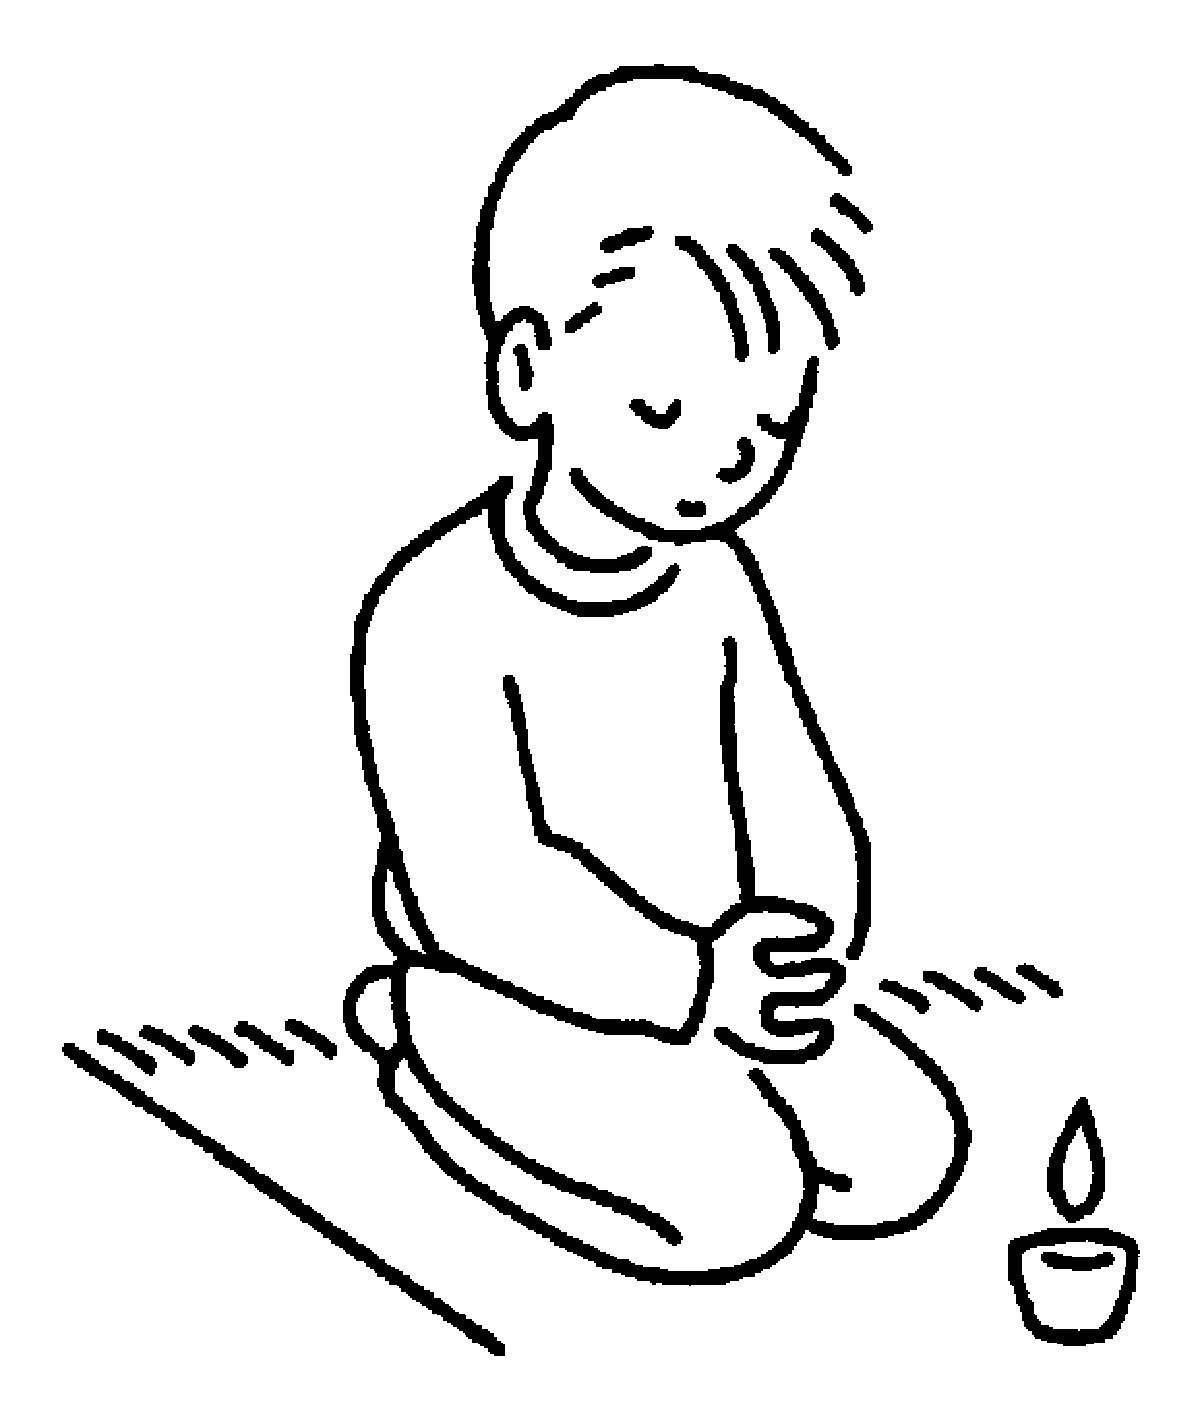 Coloring page bright prayer